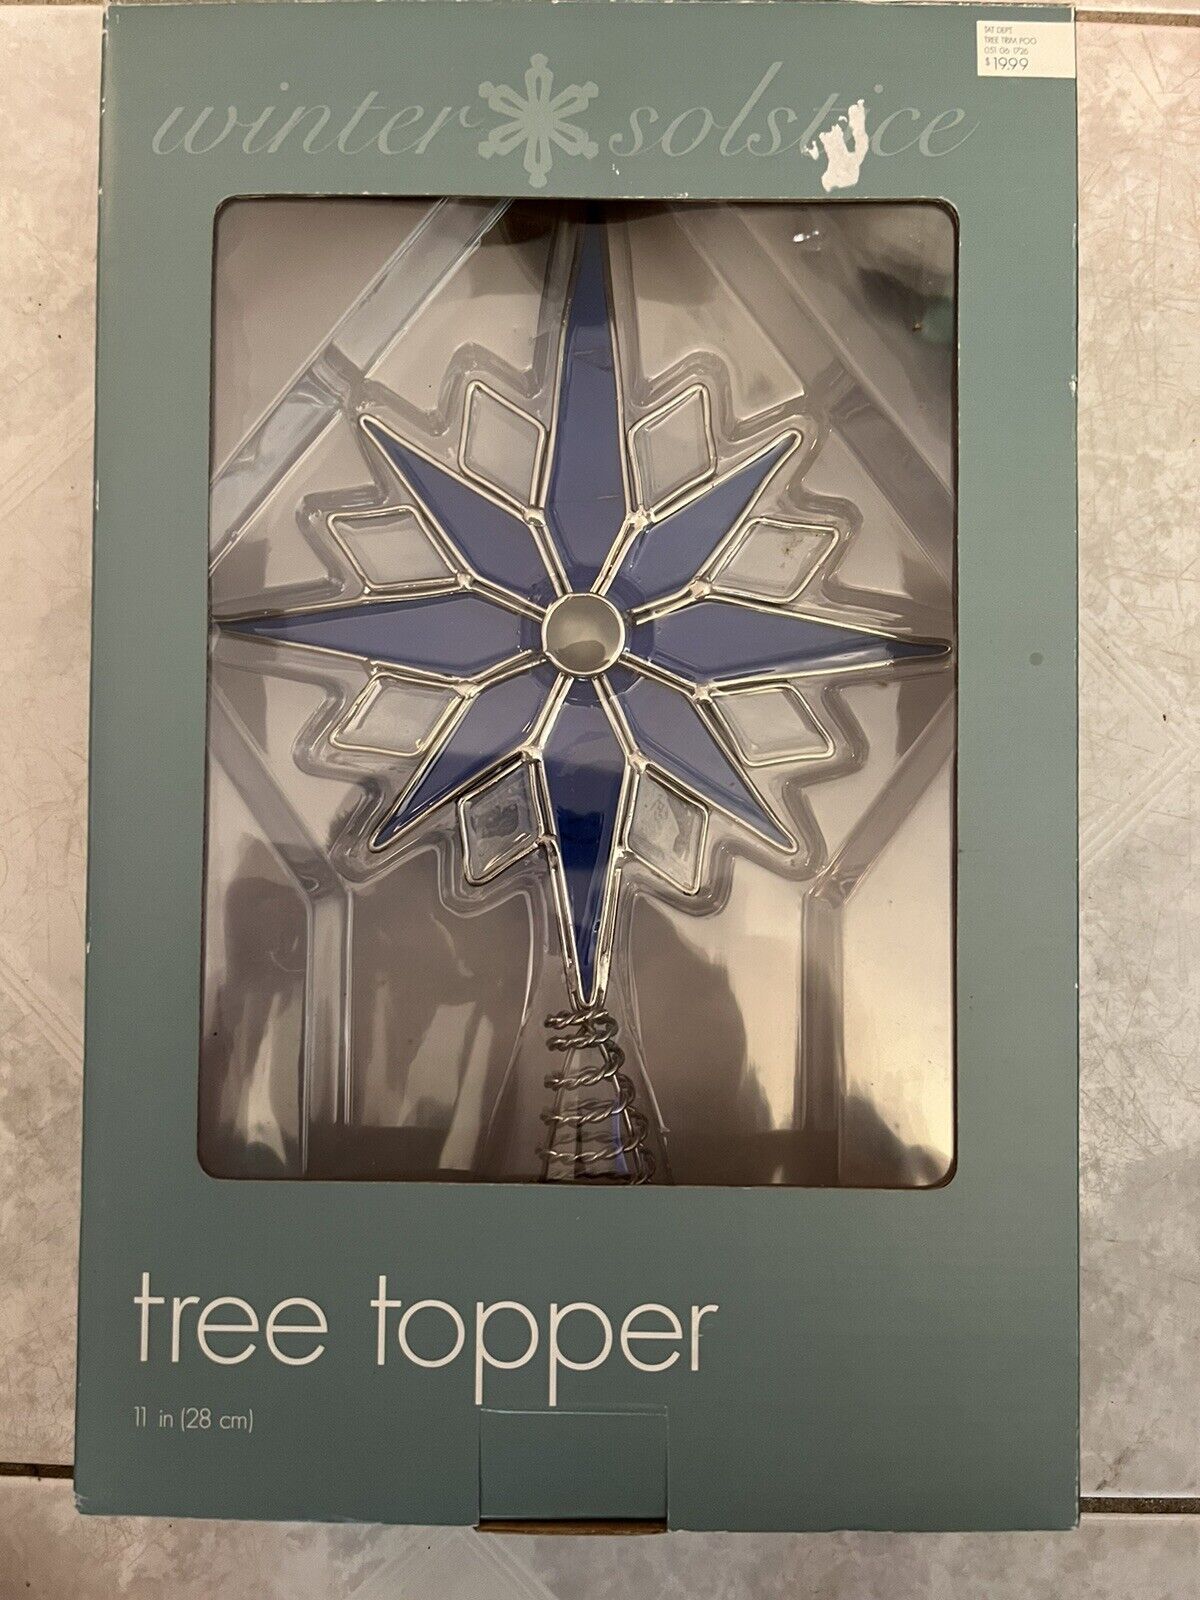 TARGET CHRISTMAS TREE TOPPER New In Box 2004